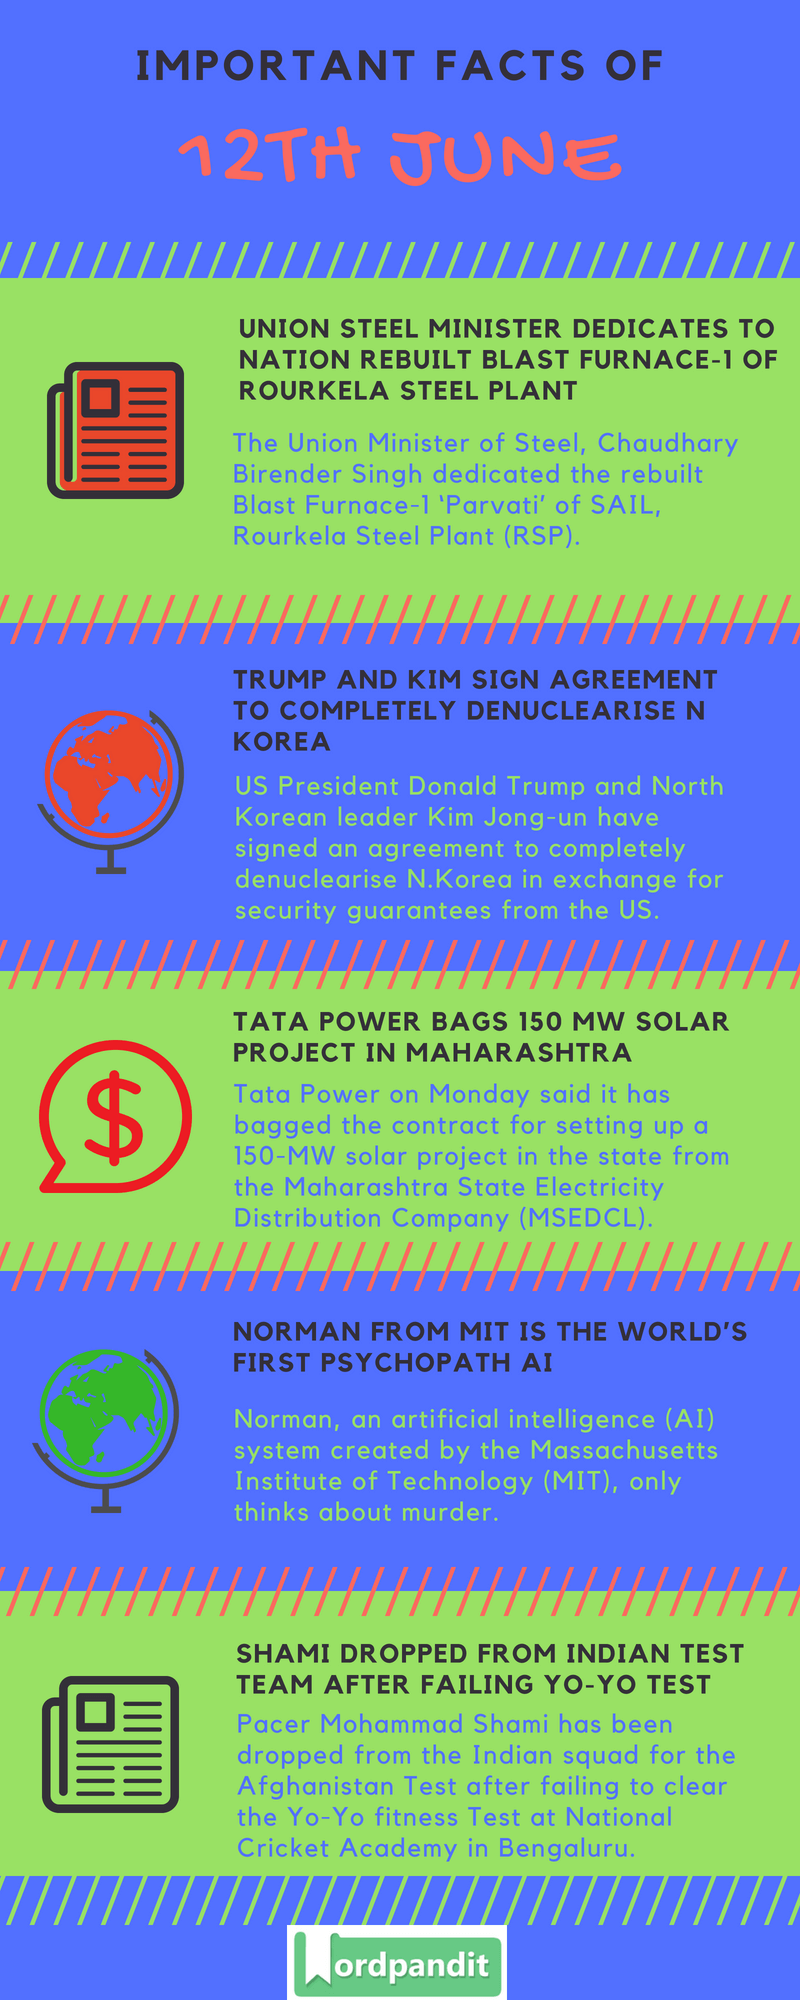 Daily Current Affairs 12 June 2018 Current Affairs Quiz June 12 2018 Current Affairs Infographic